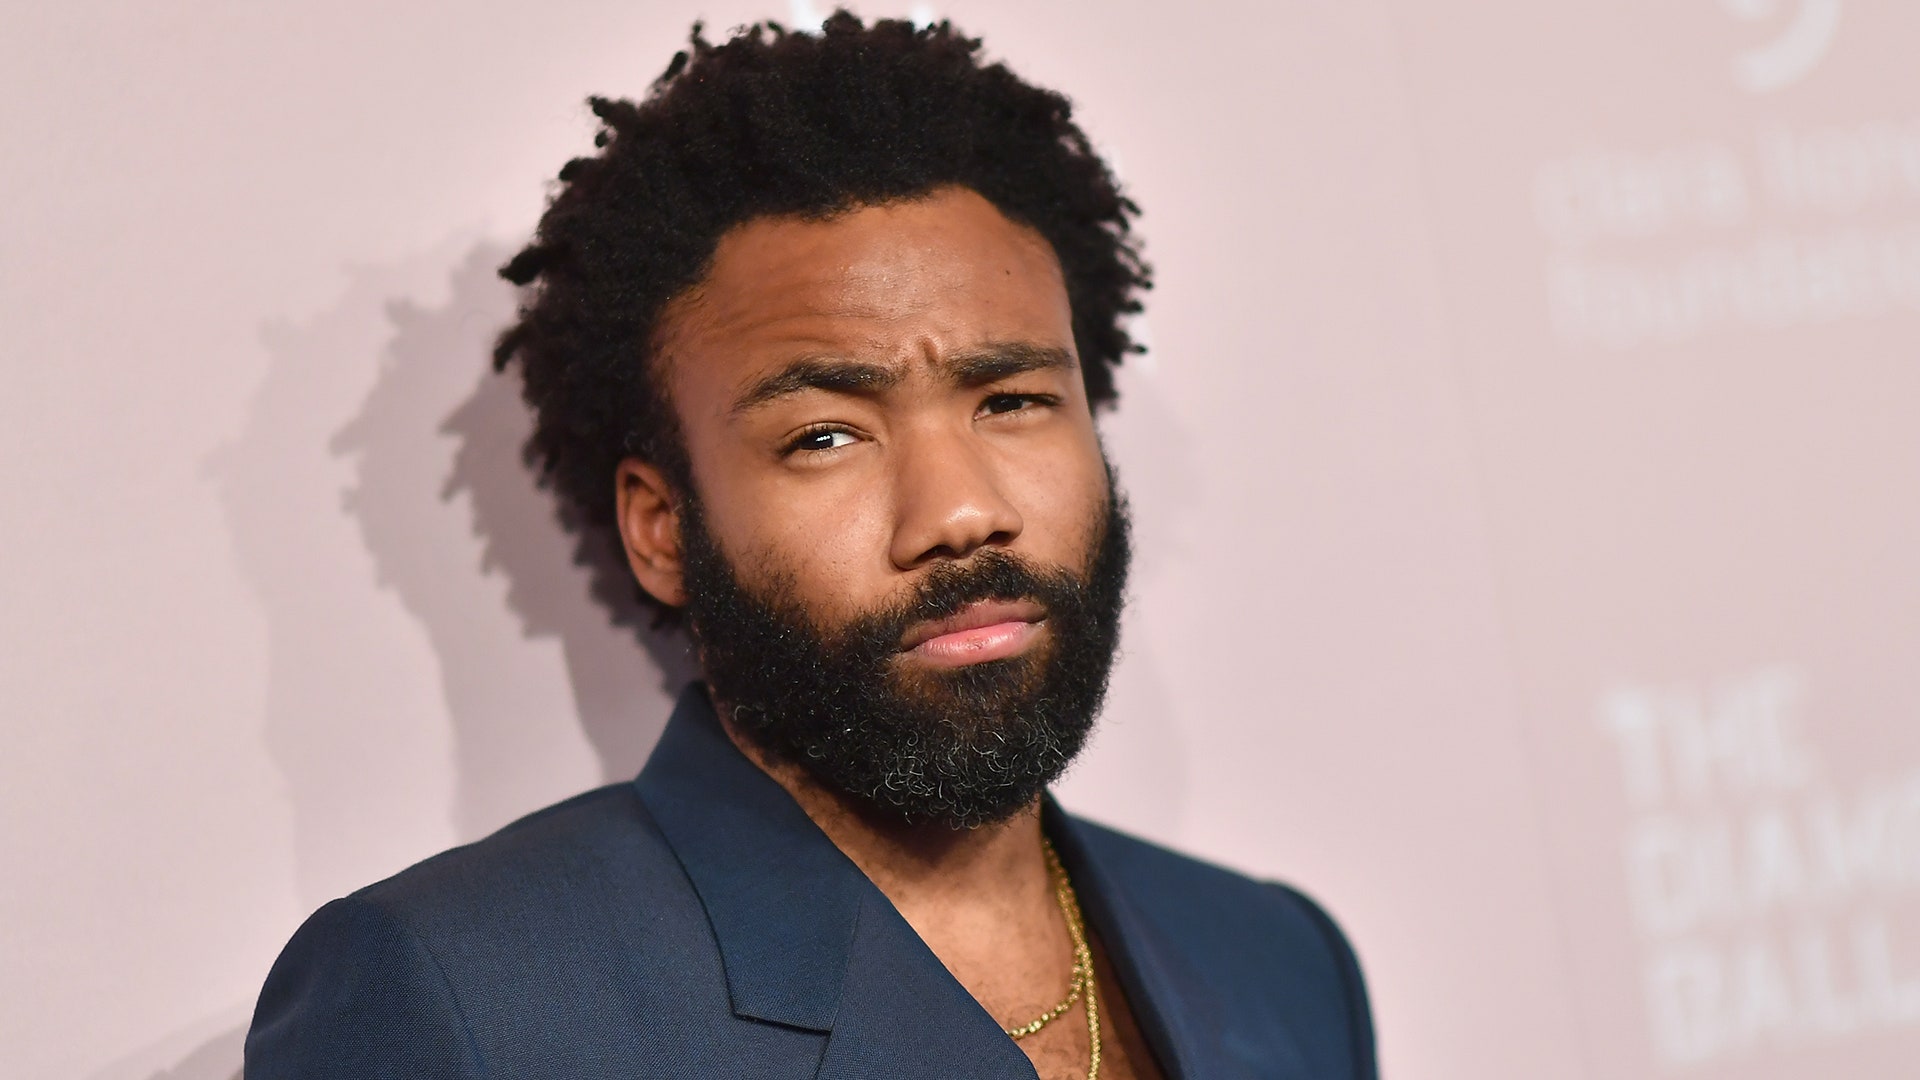 Donald Glover to star in Spider-Man spin-off